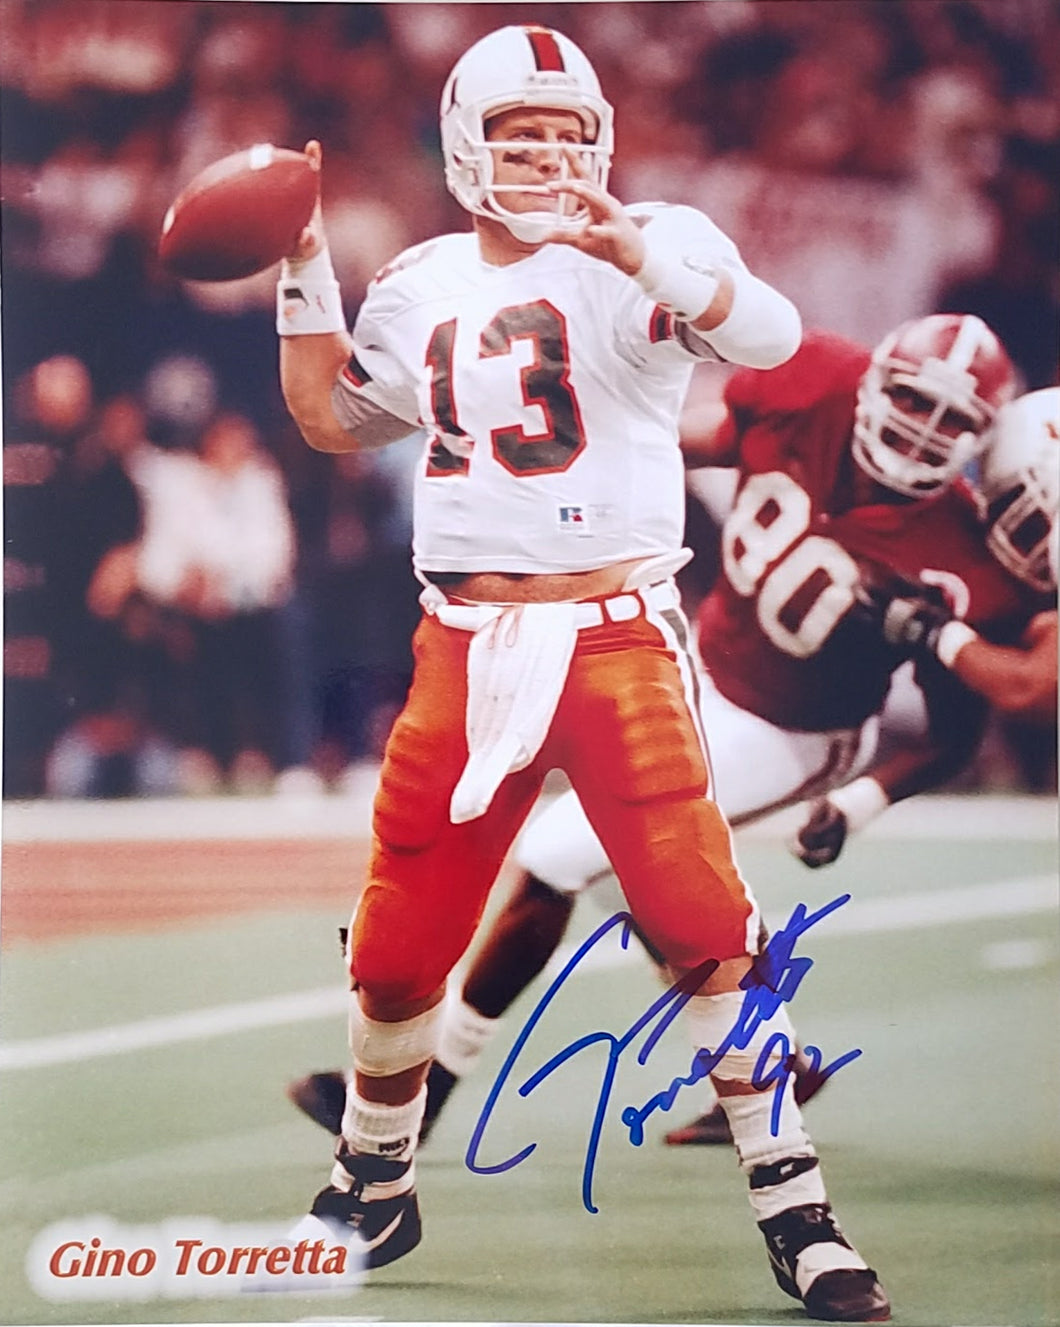 Gino Torretta  Signed Autographed 8x10